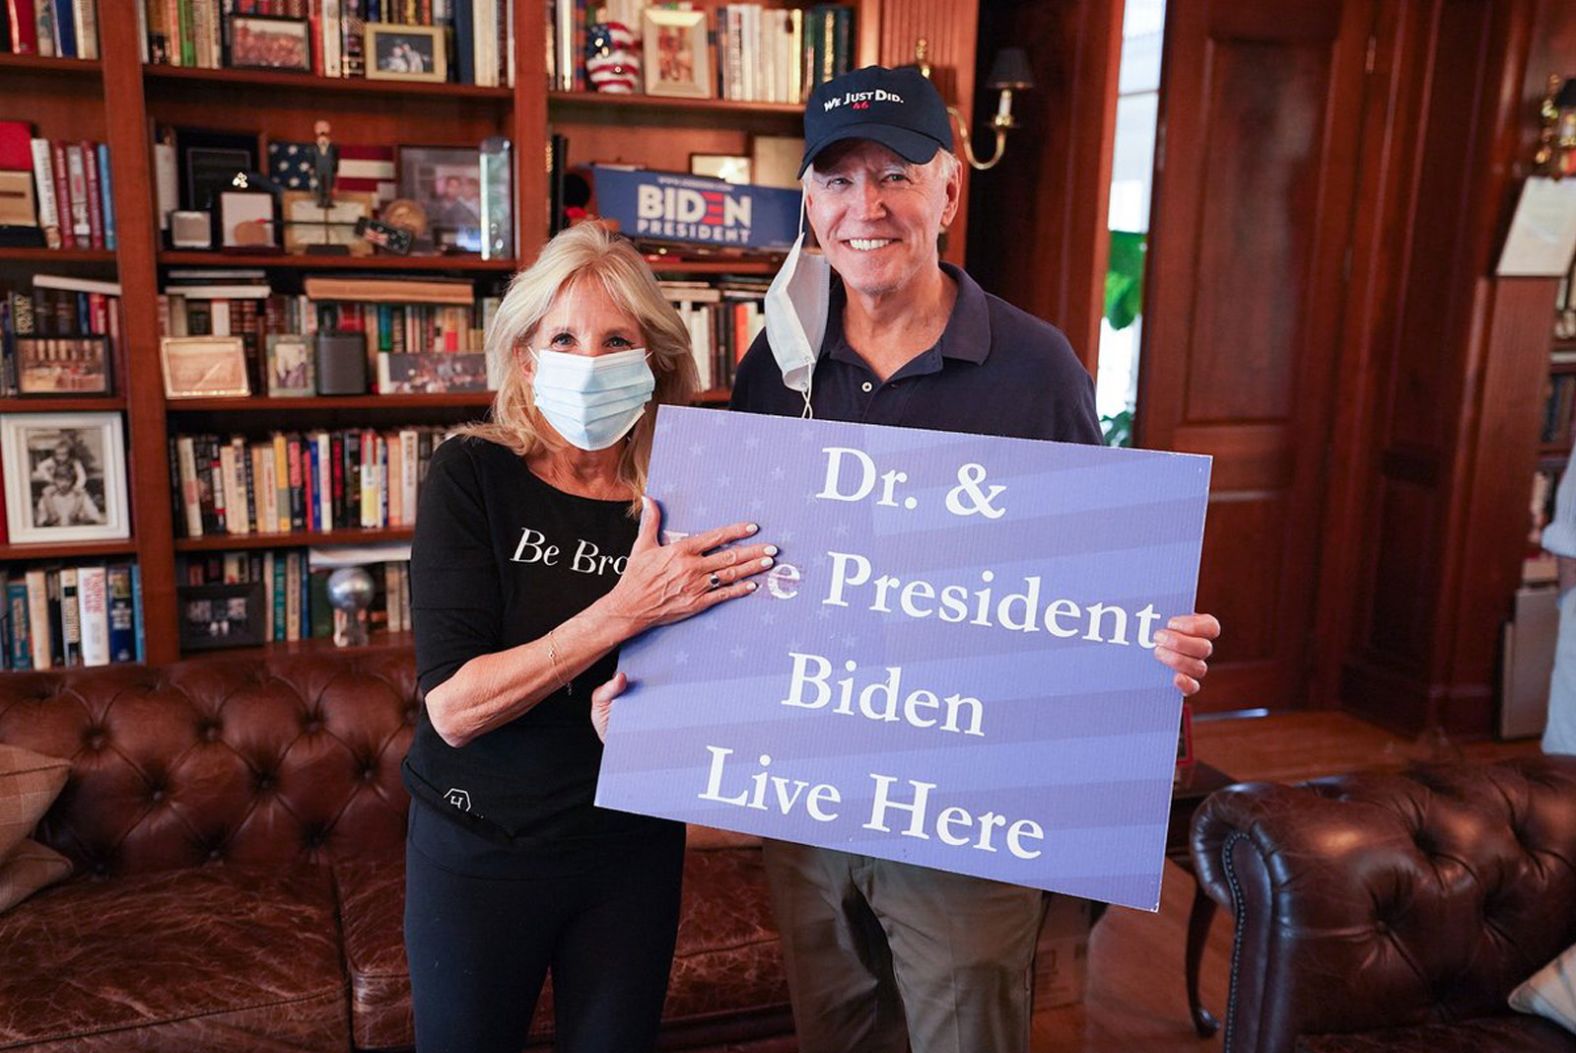 Biden's wife, Jill, <a href="index.php?page=&url=https%3A%2F%2Ftwitter.com%2FDrBiden%2Fstatus%2F1325146858763718658" target="_blank" target="_blank">tweeted this photo</a> after her husband was projected as the winner of the presidential race. "He will be a President for all of our families," she said.